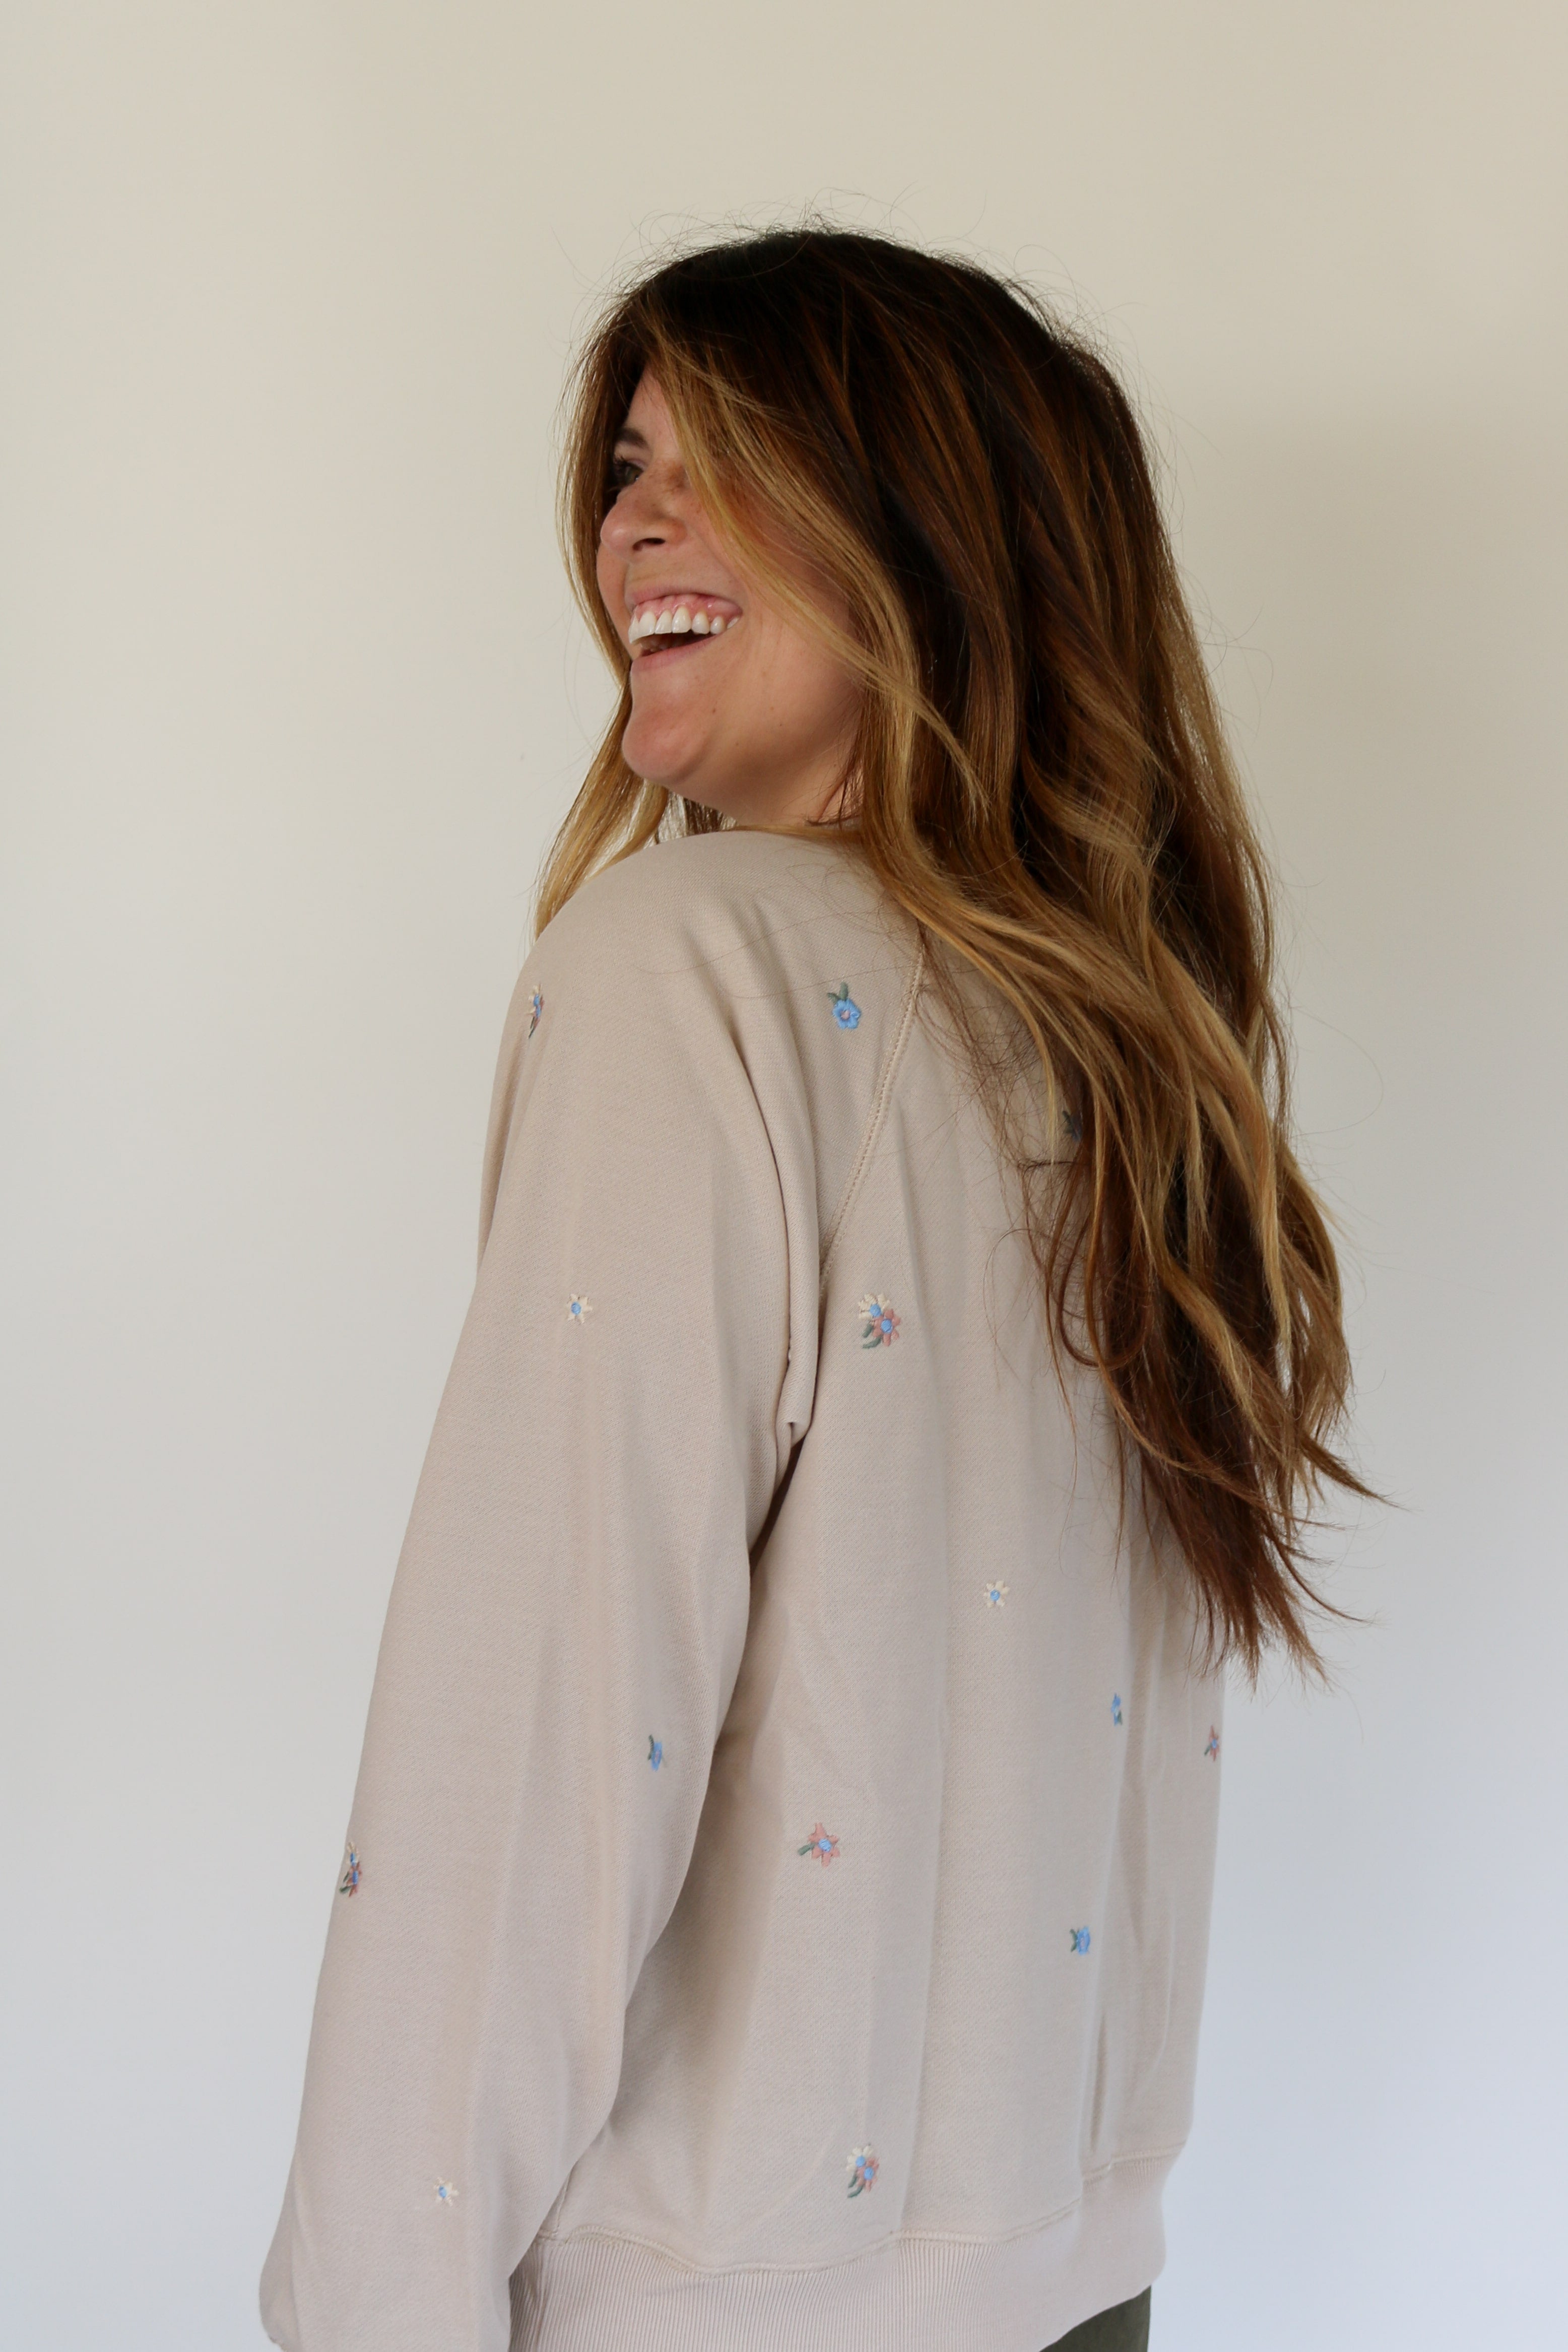 Floral Embroidered Sweatshirt in Taupe